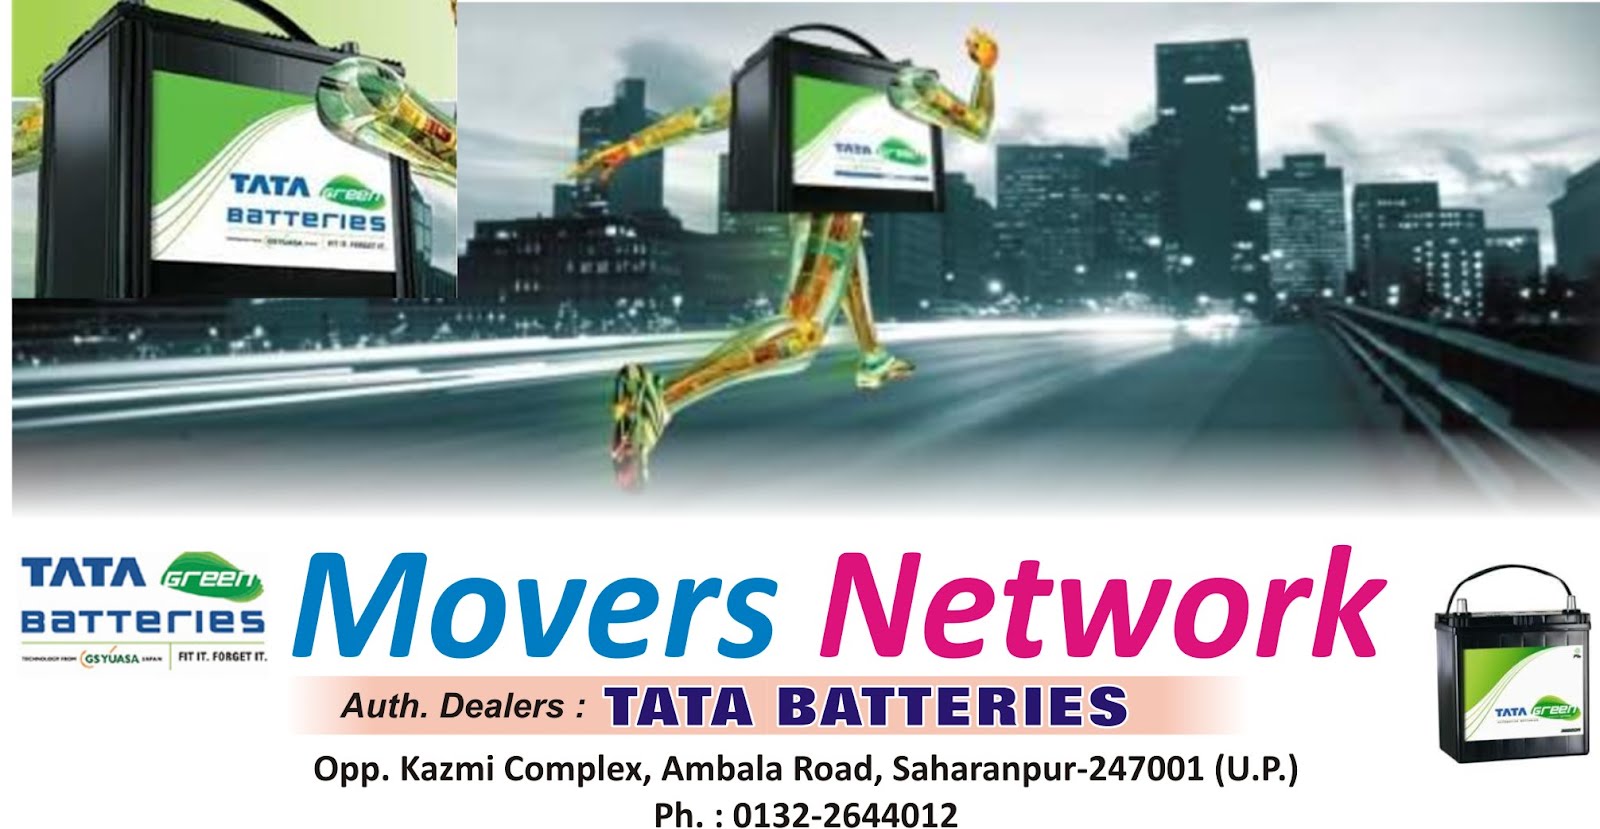 MOVERS NETWORK